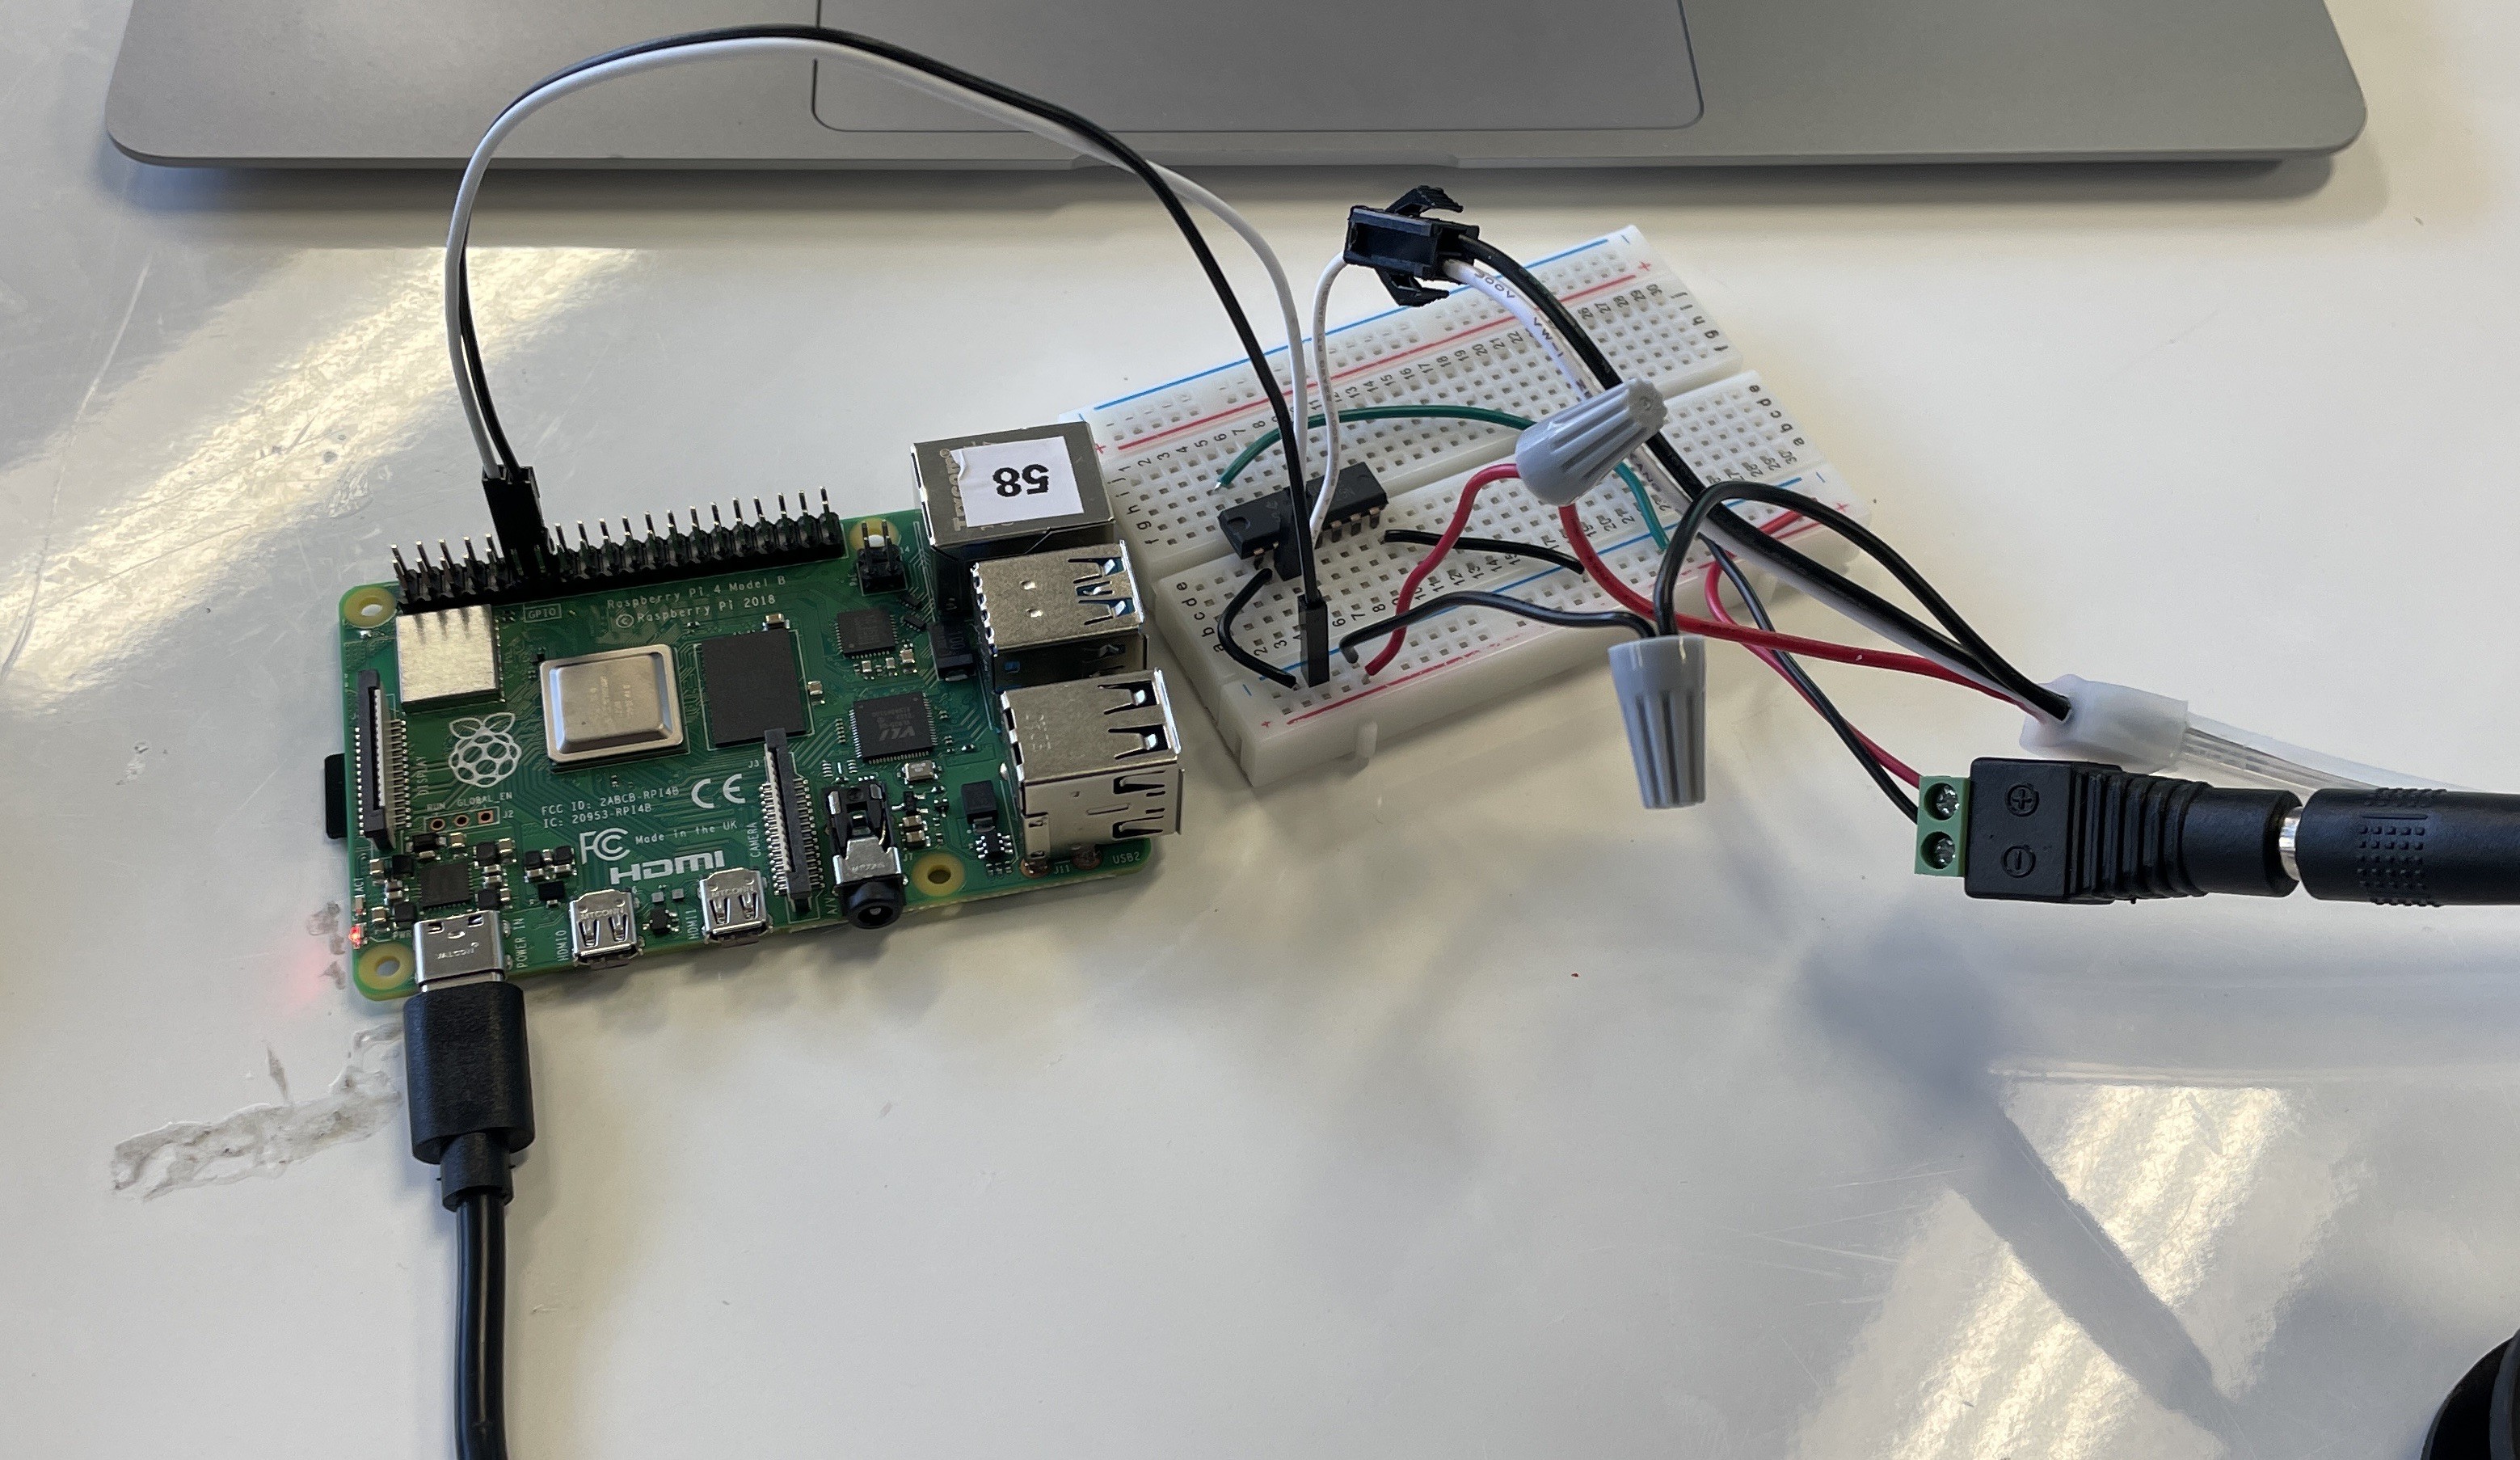 The circuitry connected to the raspberry pi